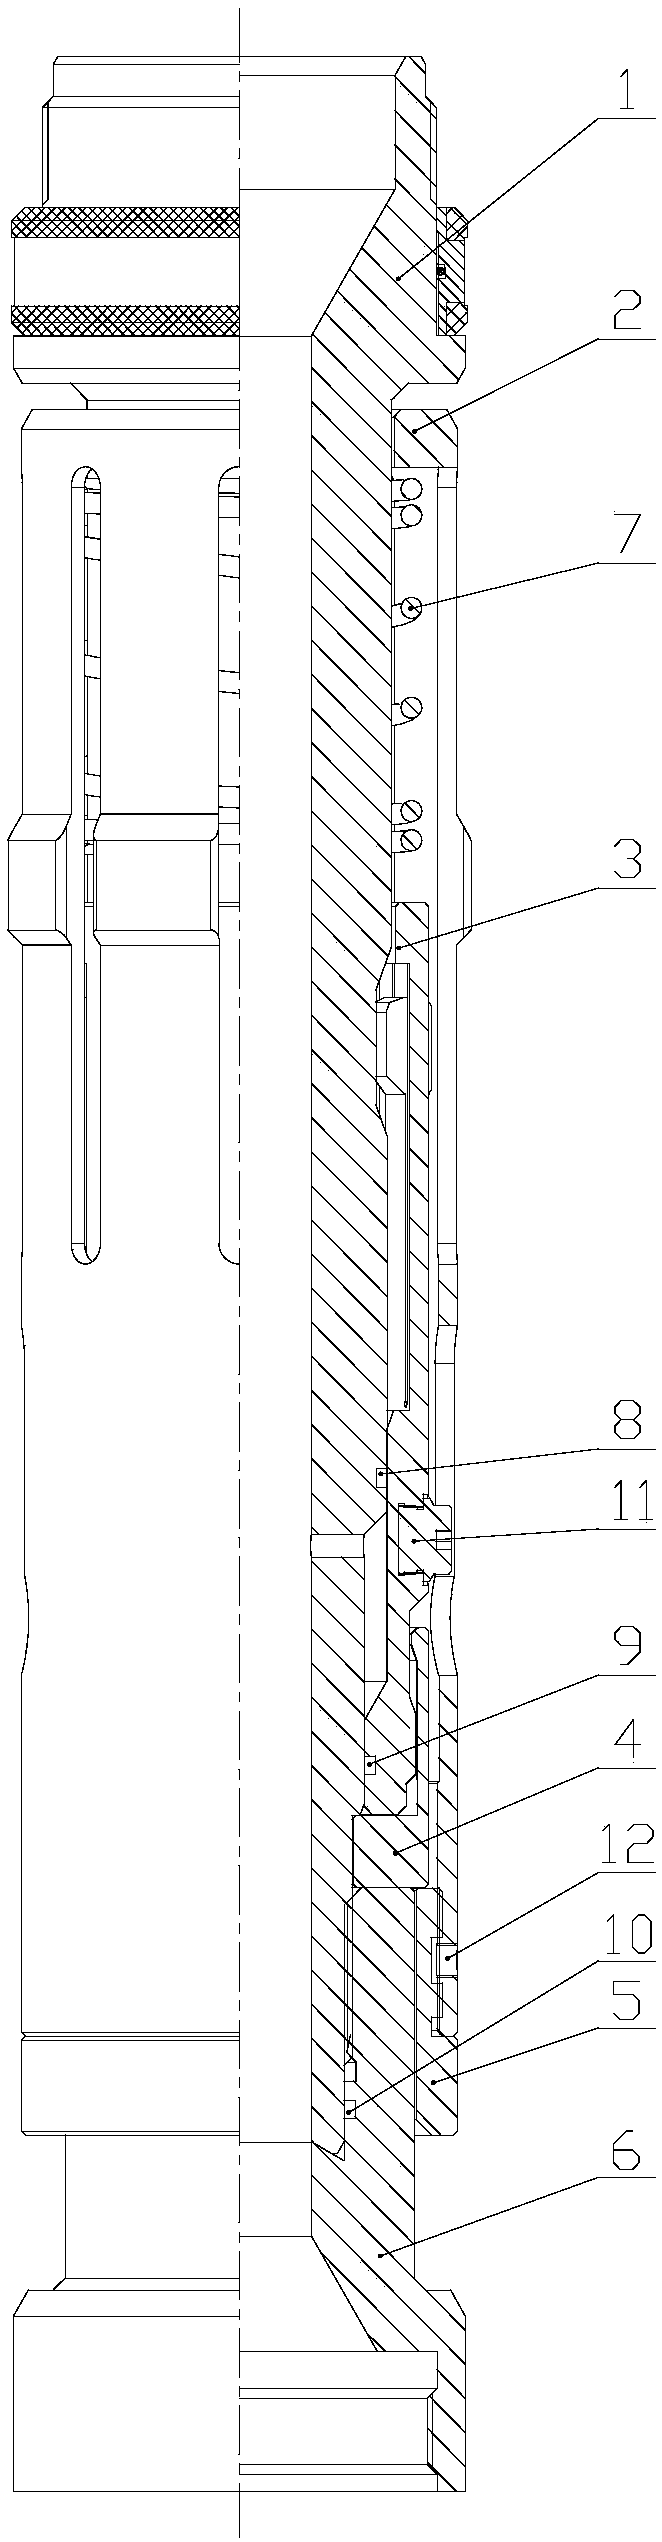 Hydraulic positioning tool applied to fracturing filling sand prevention operation